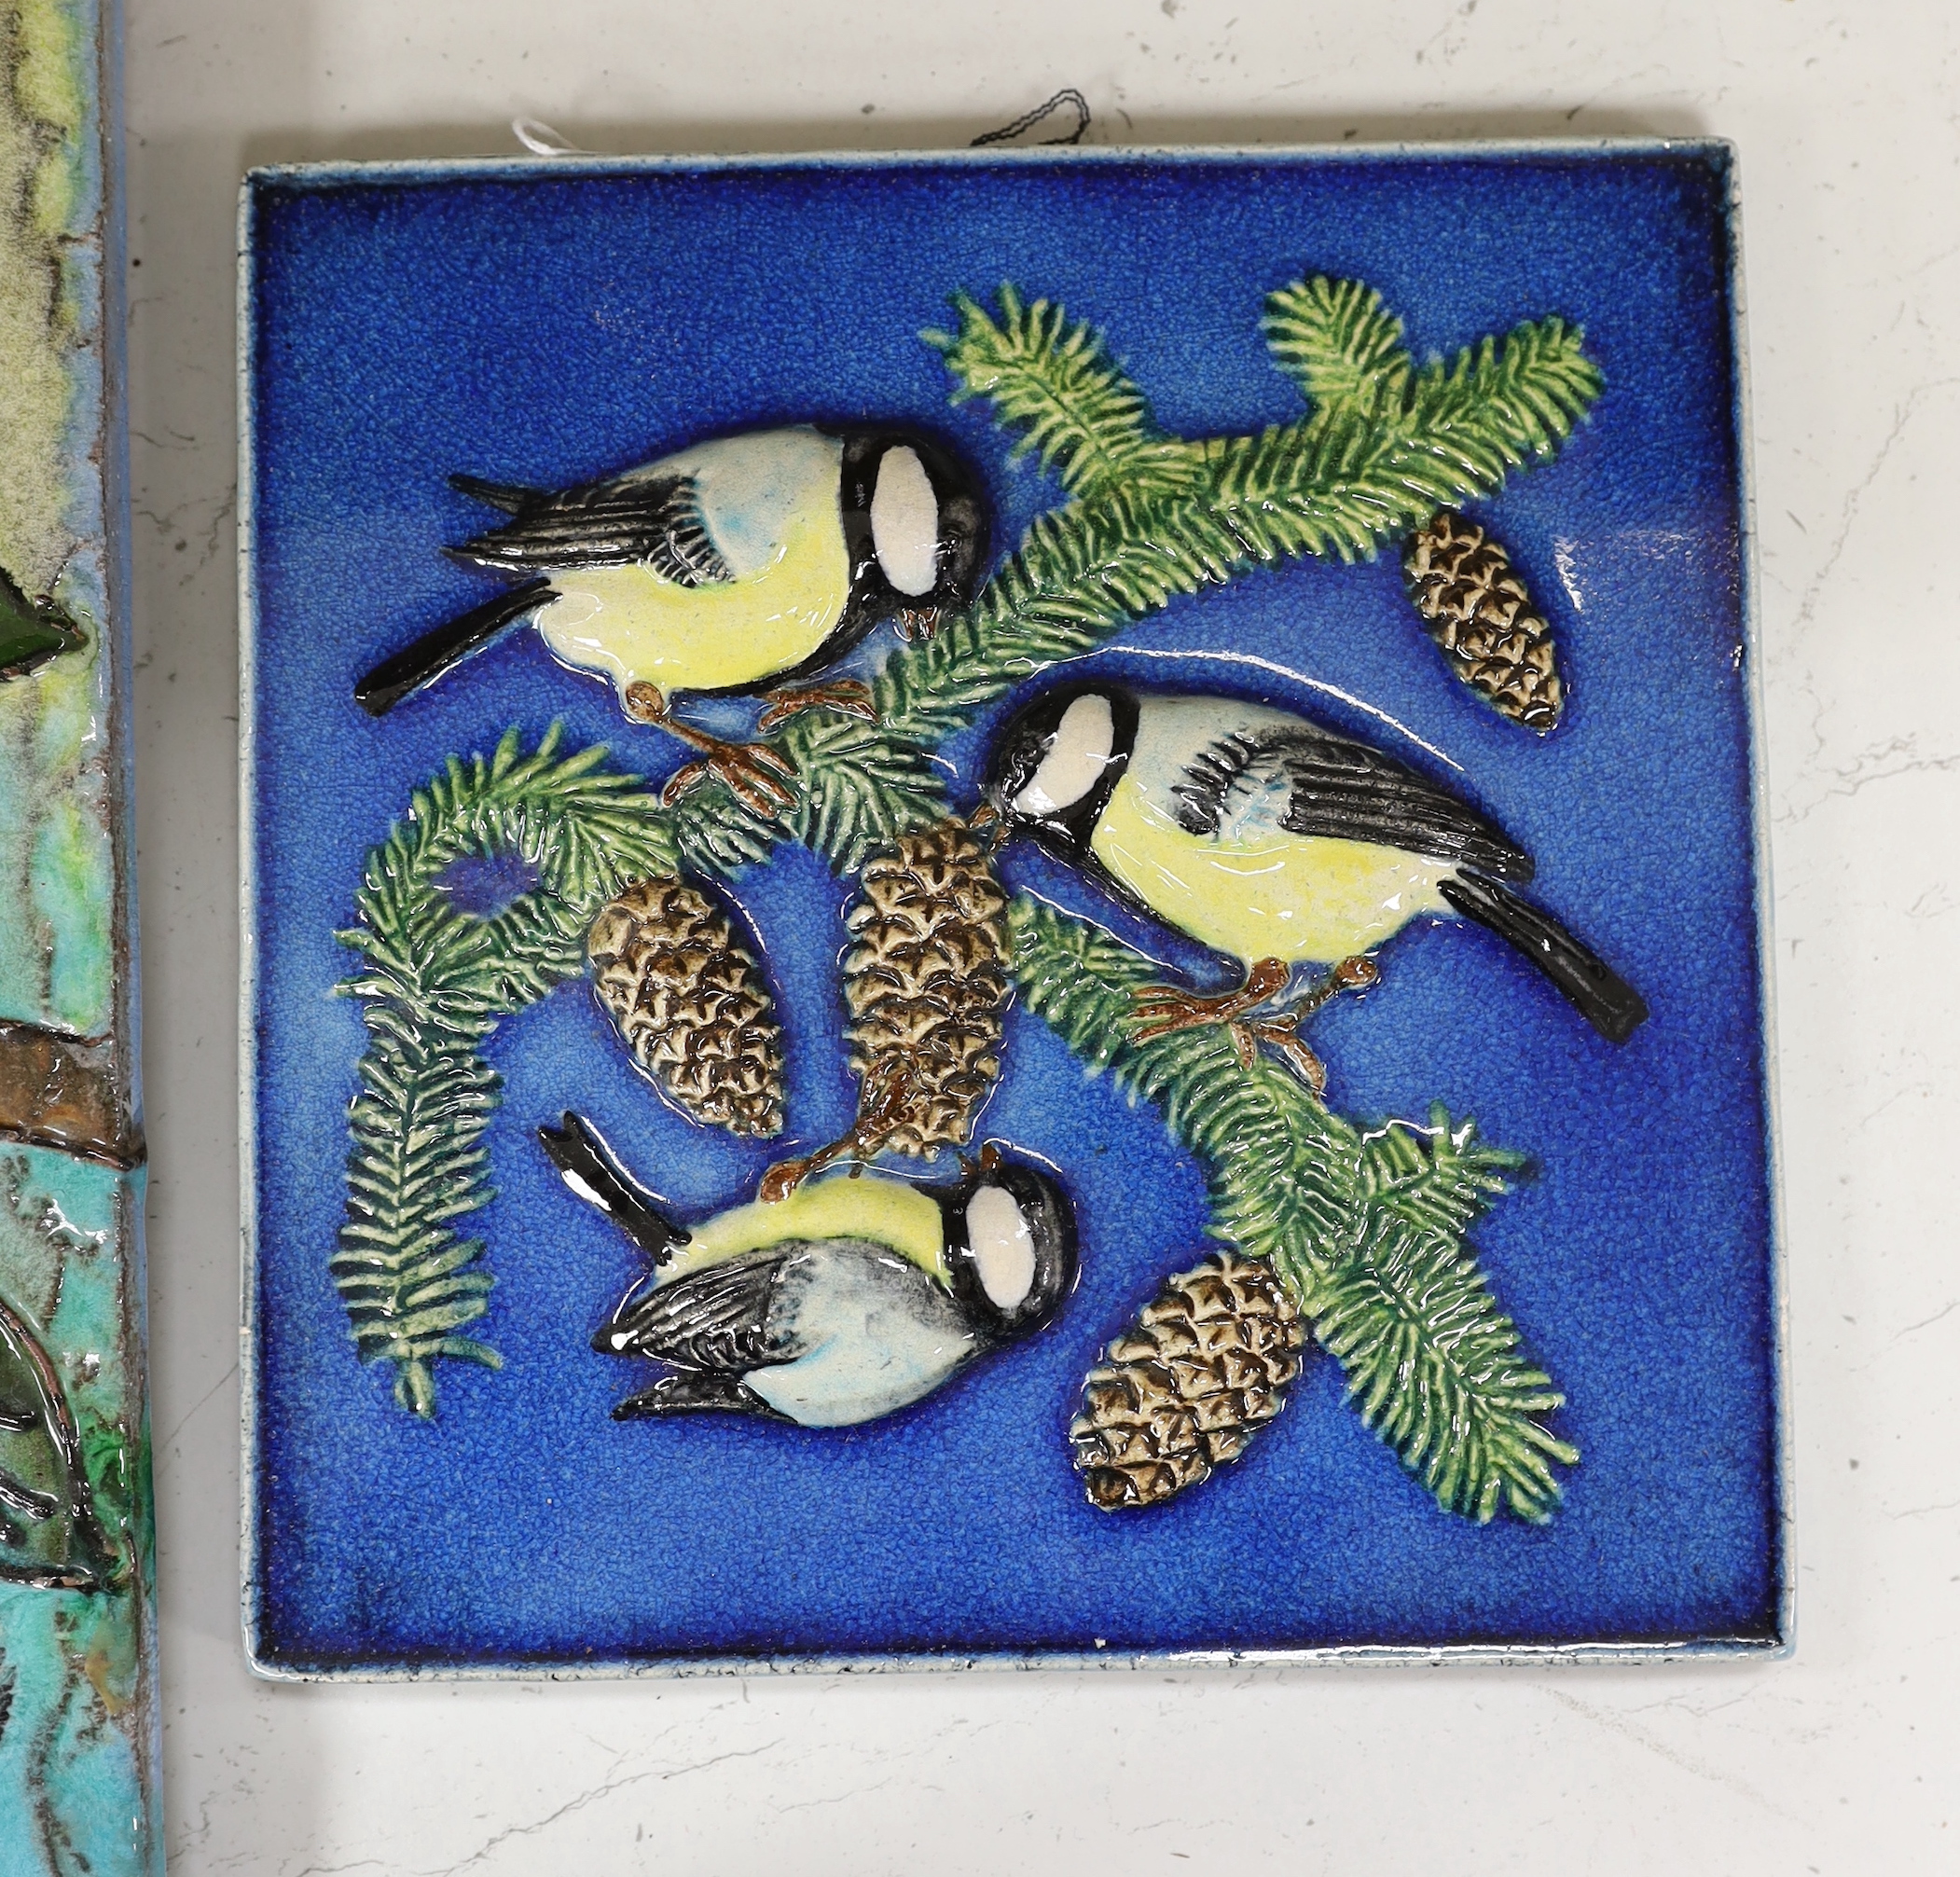 Two West German pottery Karlsruhe Majolika 1960s wall plaques of birds, the larger with budgie, smaller with blue tits, larger plaque 40 x 39.5cm